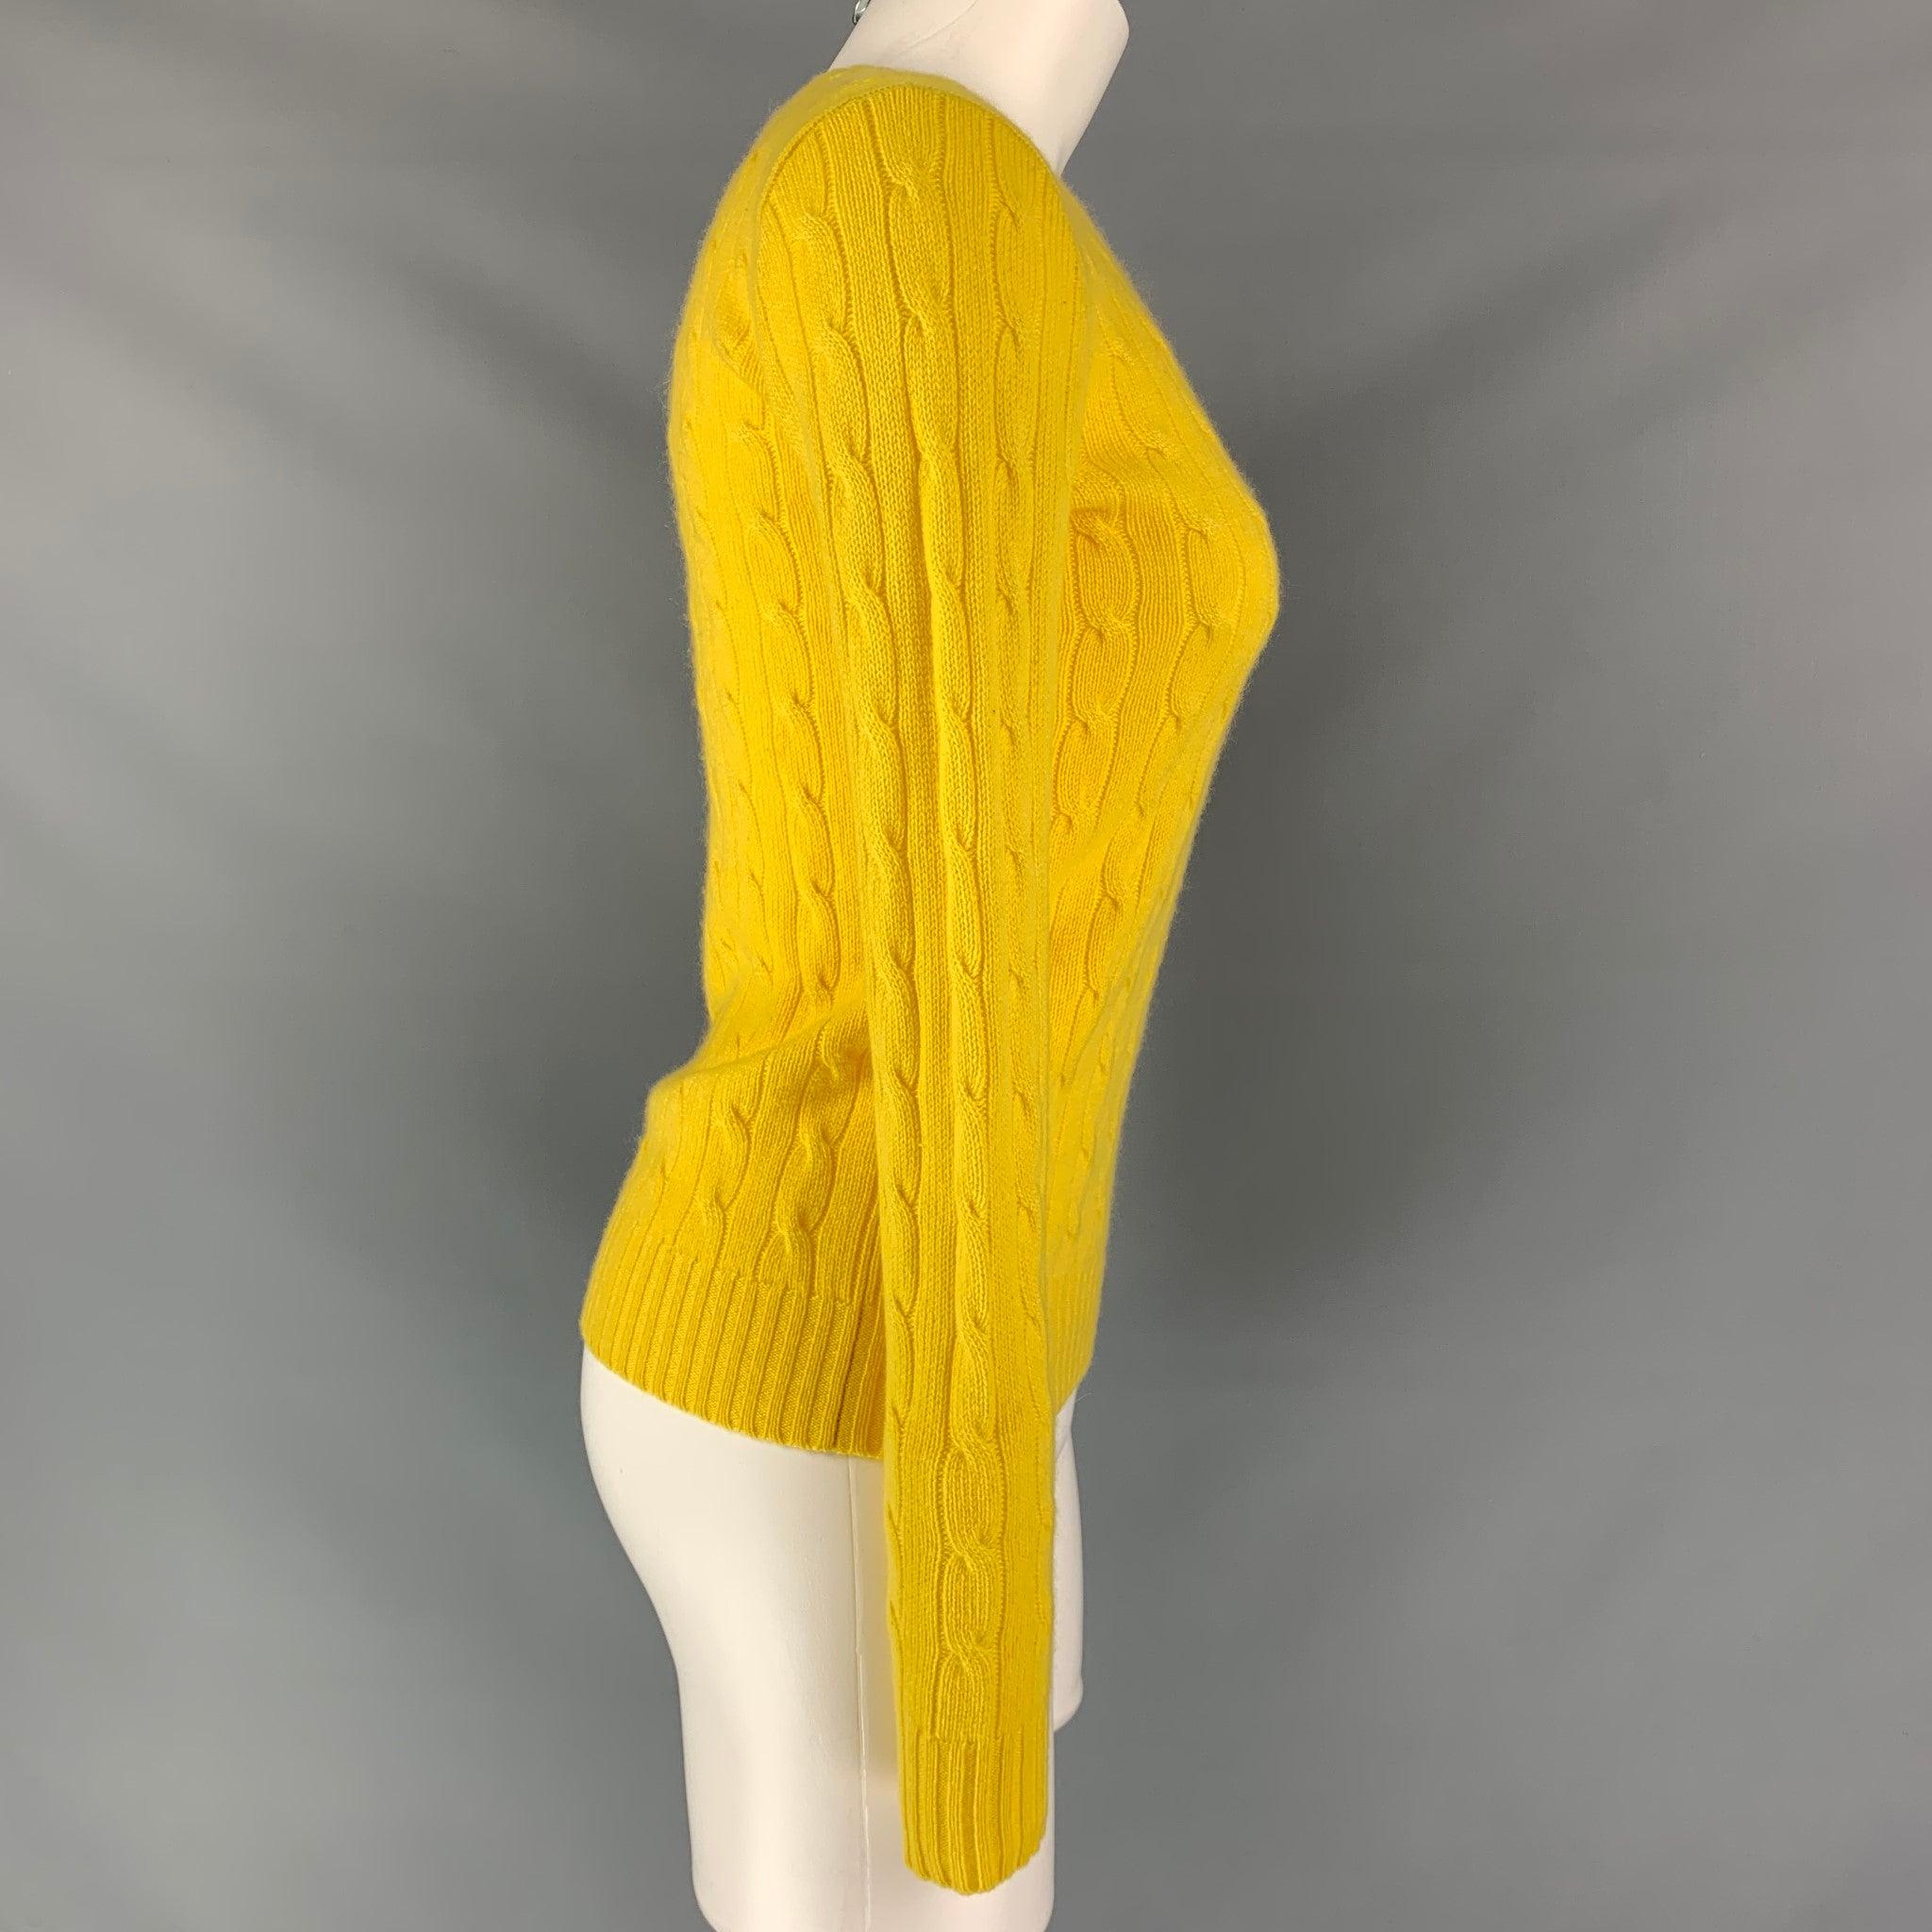 POLO RALPH LAUREN 
pullover sweater comes in a yellow cable knit cashmere featuring crew neck, and long sleeves. Very Good Pre-Owned Condition. 

Marked:   L
 

Measurements: 
 
Shoulder: 17 inBust: 38 inSleeve: 28 inLength:
23.5 in
  
  
